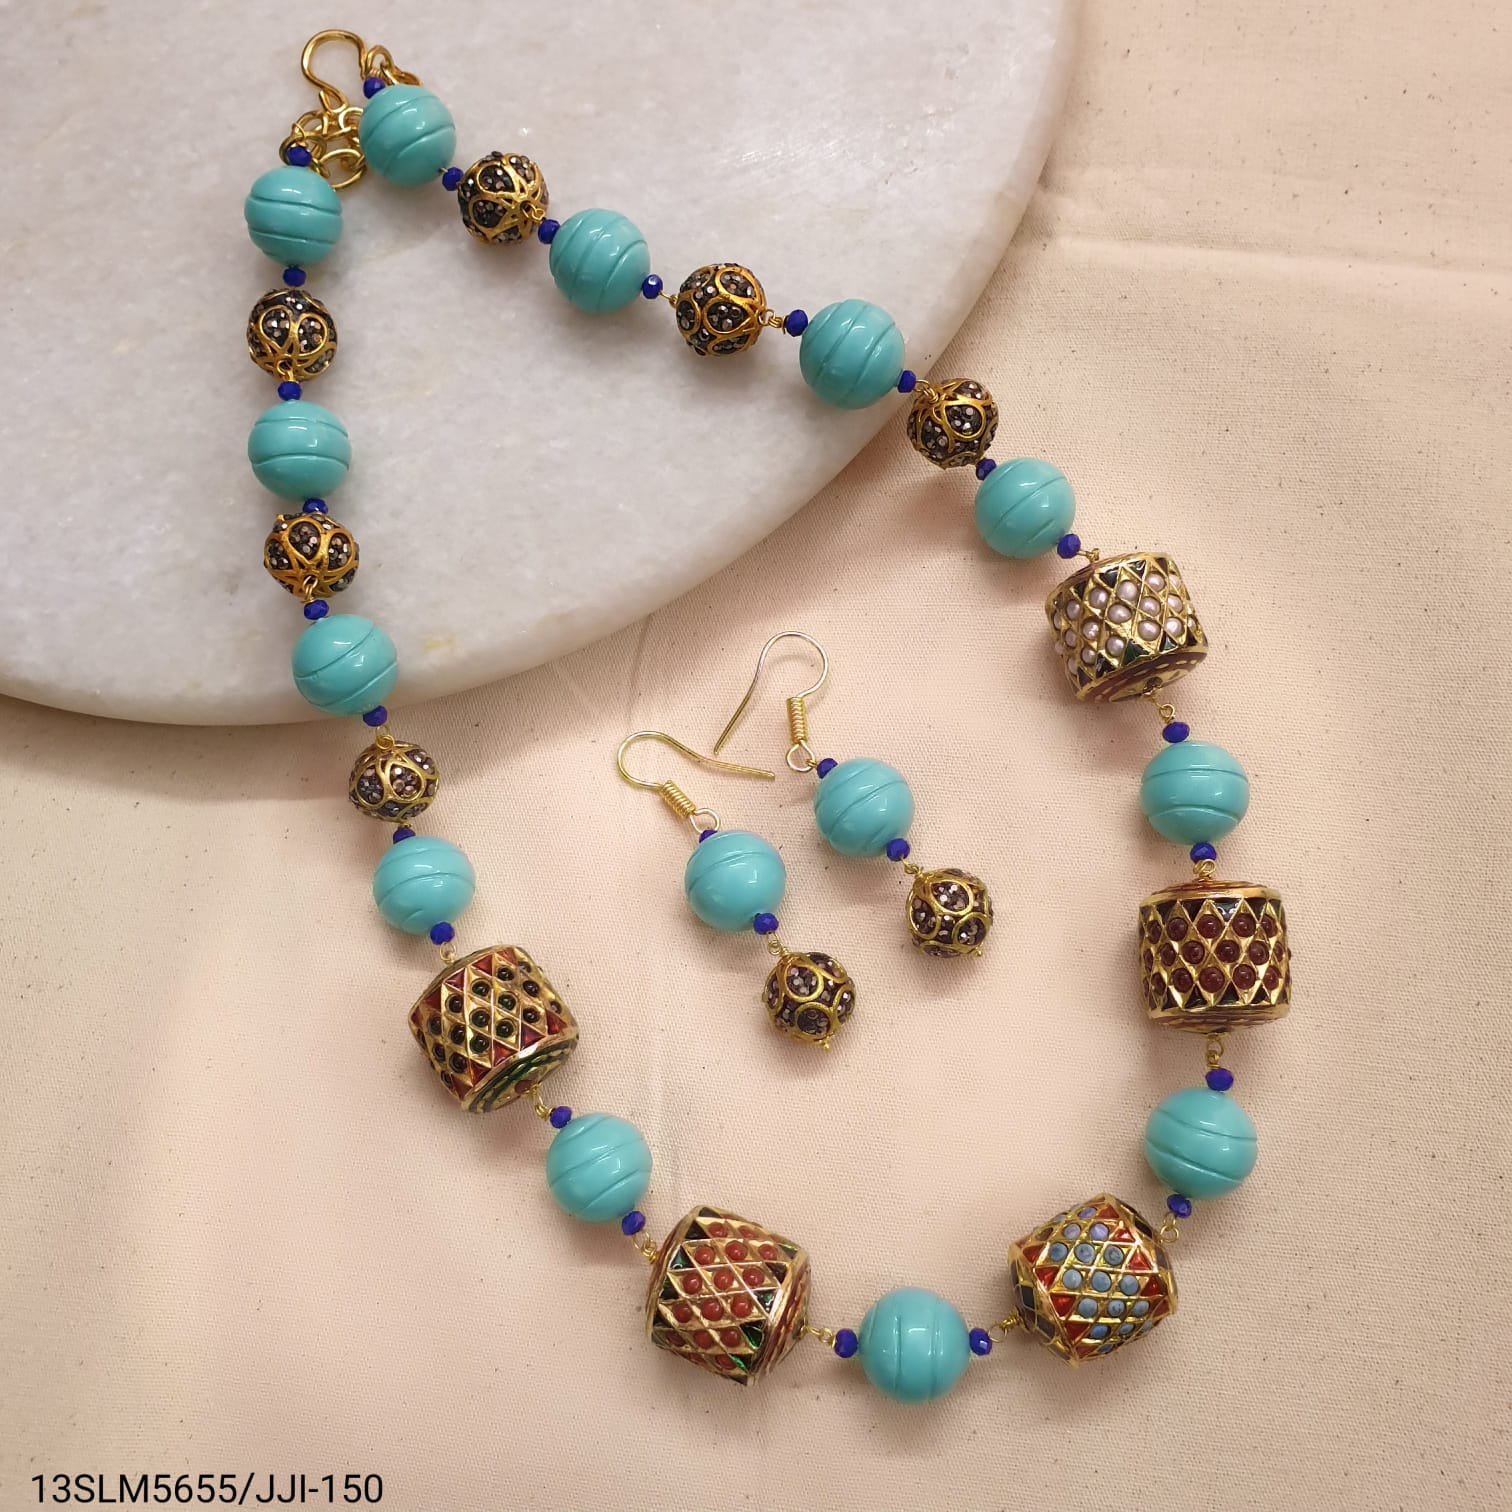 Turquoise Beaded Jadau Necklace With Earrings